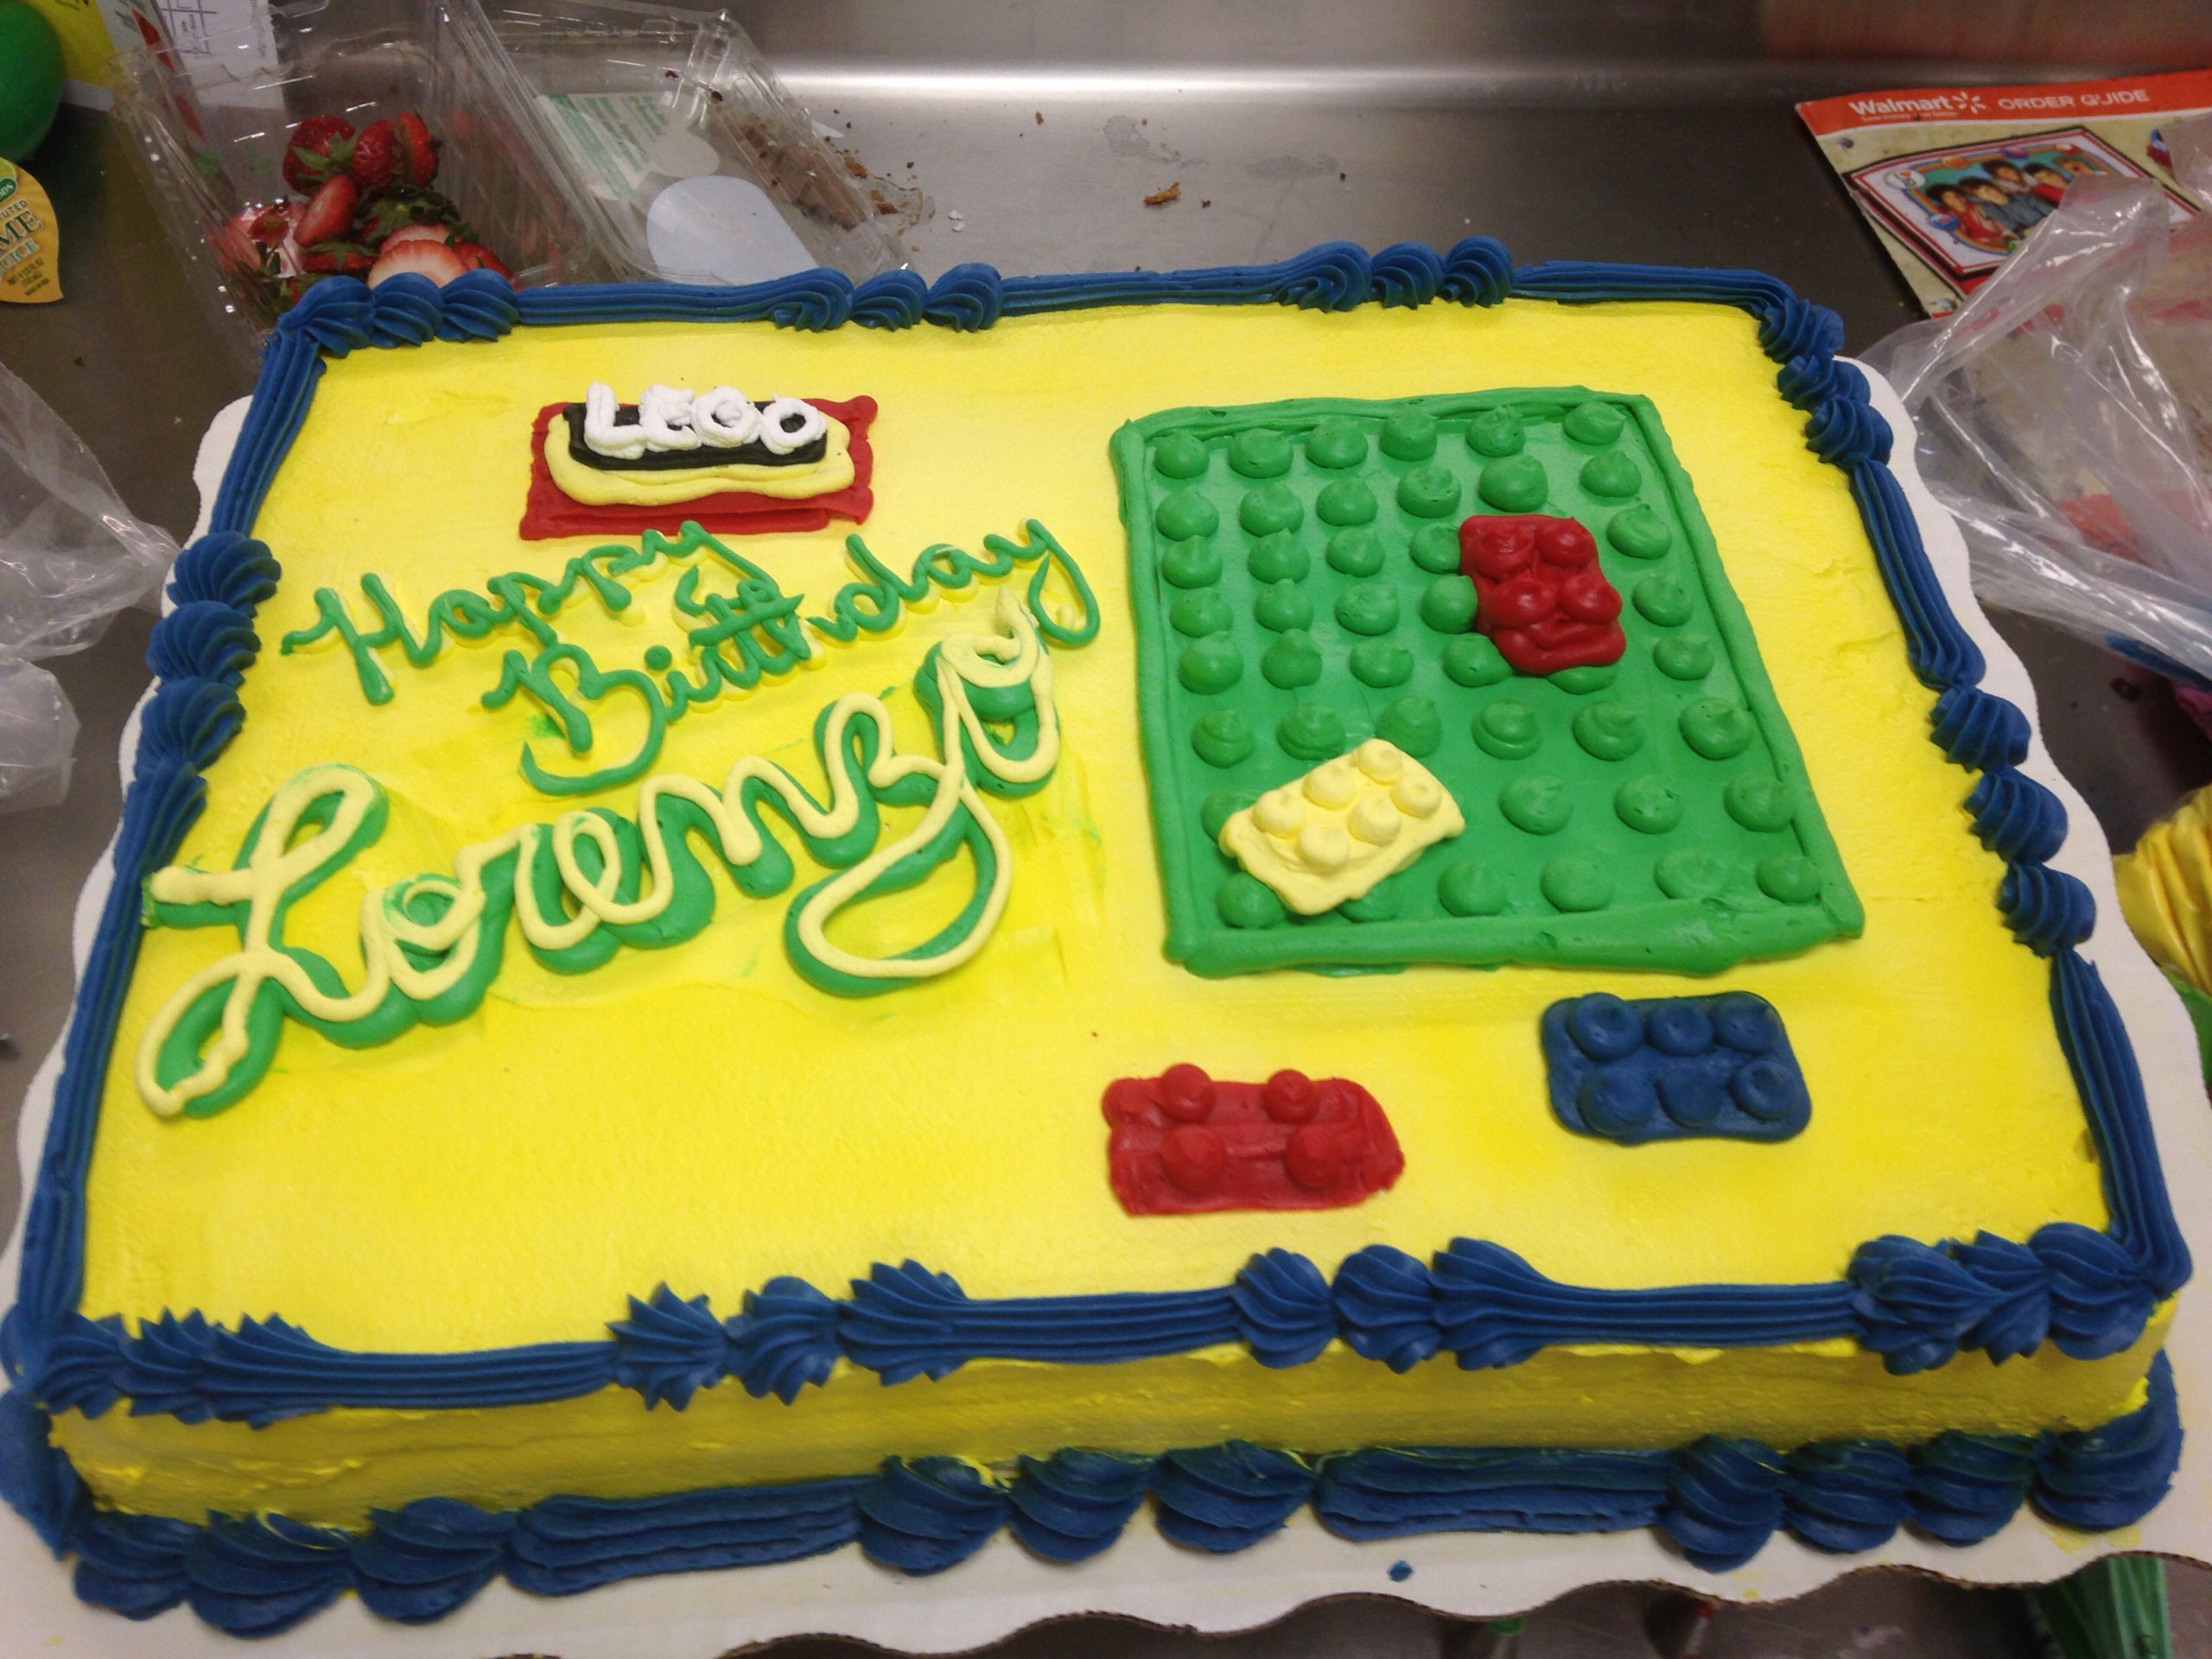 Birthday Cakes At Walmart Bakery
 Home Tips Kids Will Have A Fun With Walmart Cake Designs